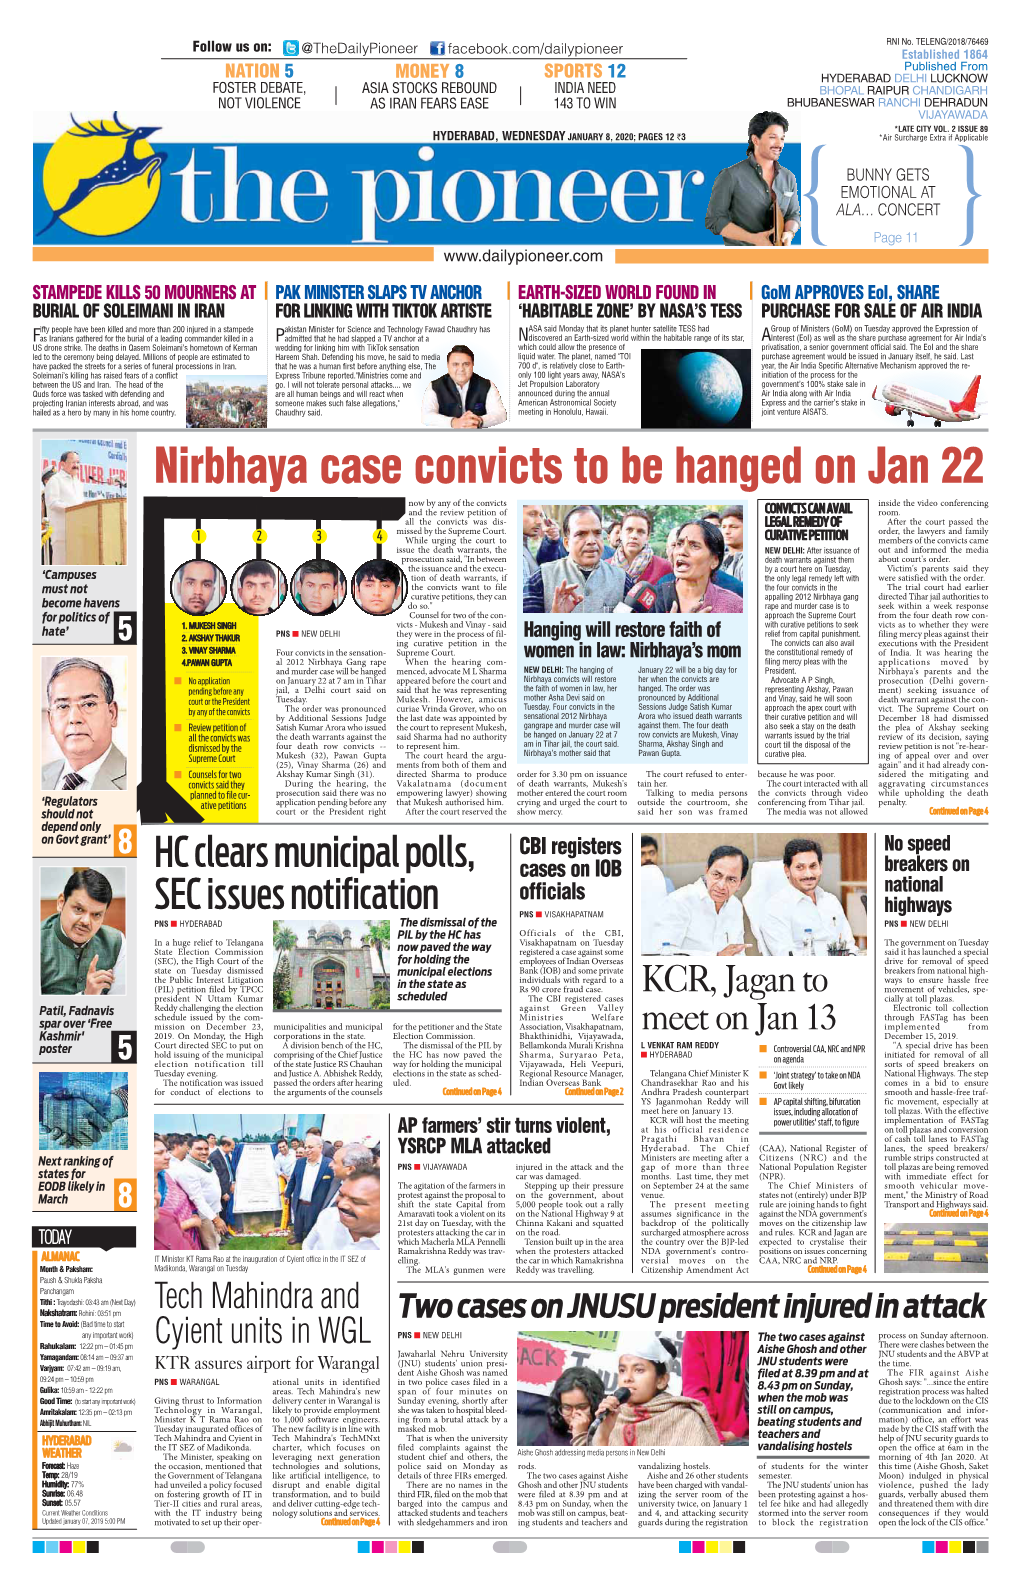 Nirbhaya Case Convicts to Be Hanged on Jan 22 Now by Any of the Convicts Inside the Video Conferencing and the Review Petition of CONVICTSCANAVAIL Room